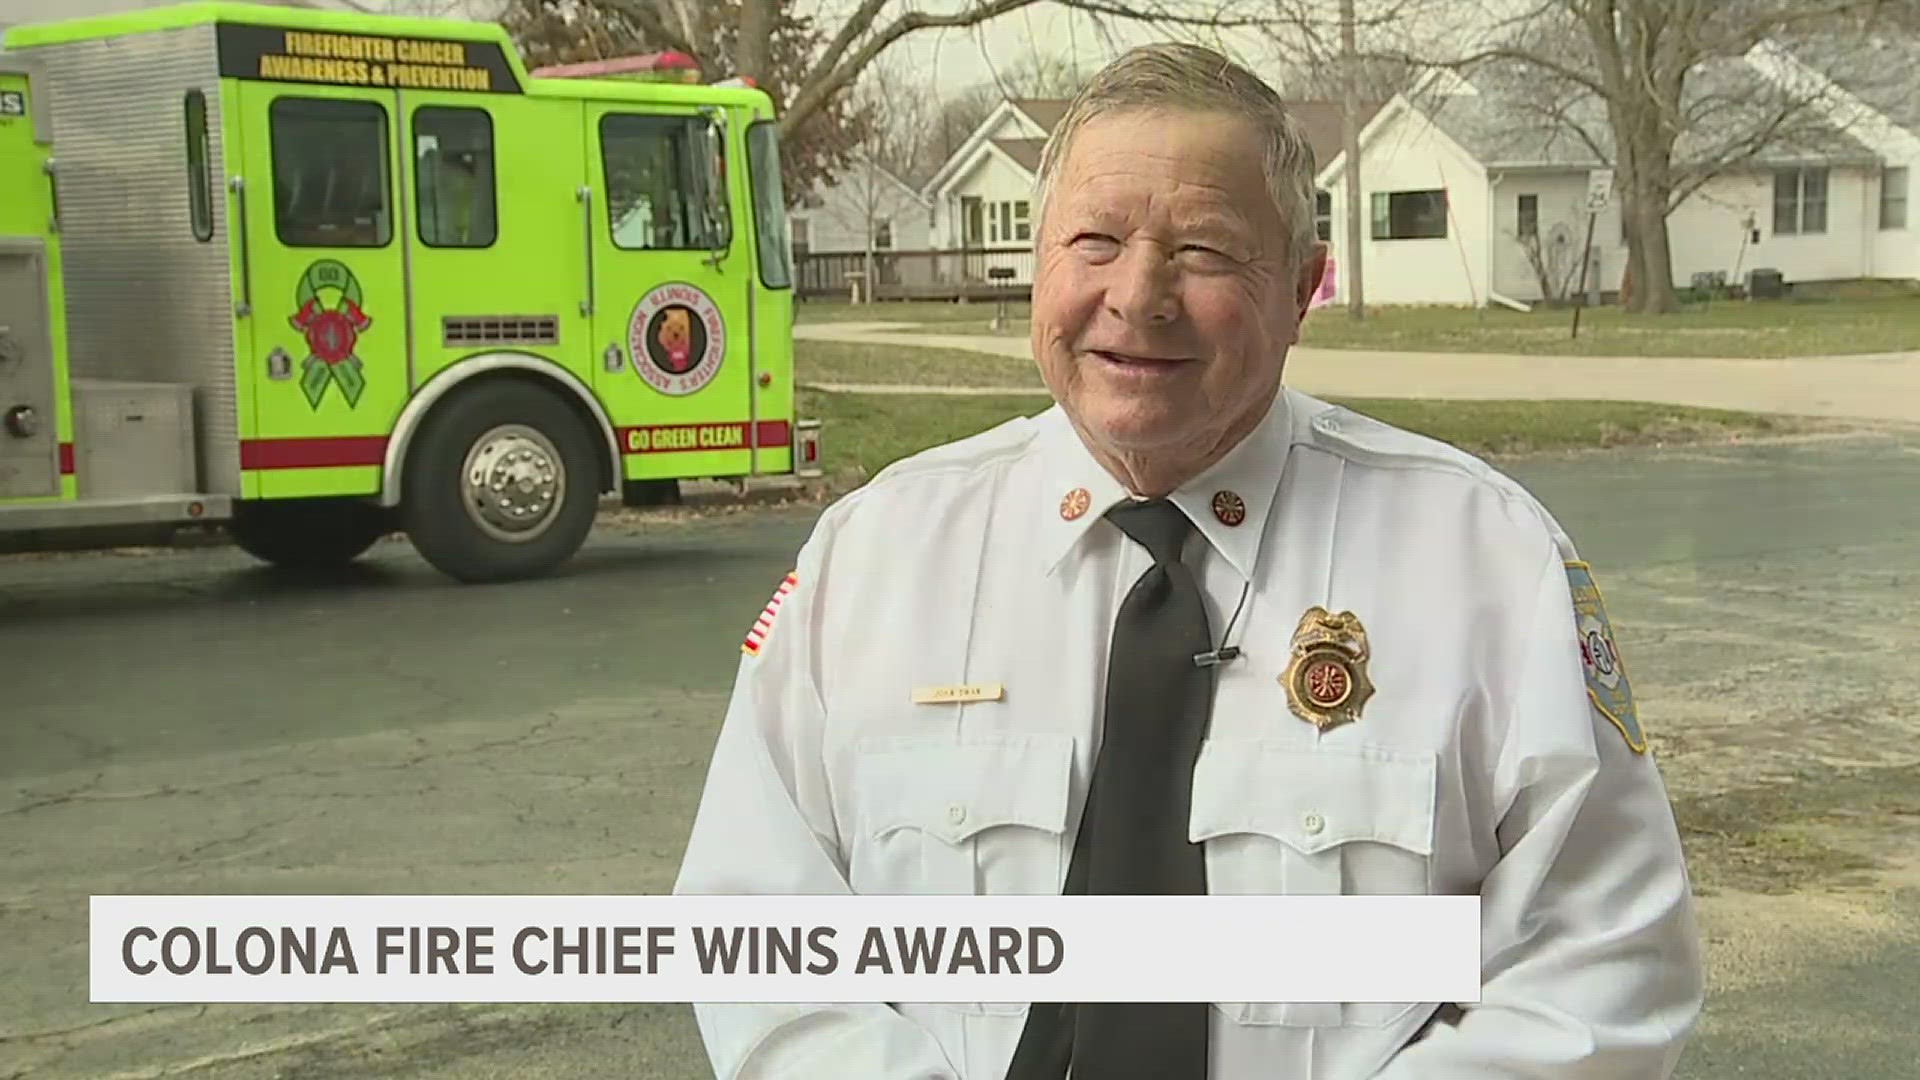 John Swan was honored for his work raising awareness about cancer risks among firefighters.